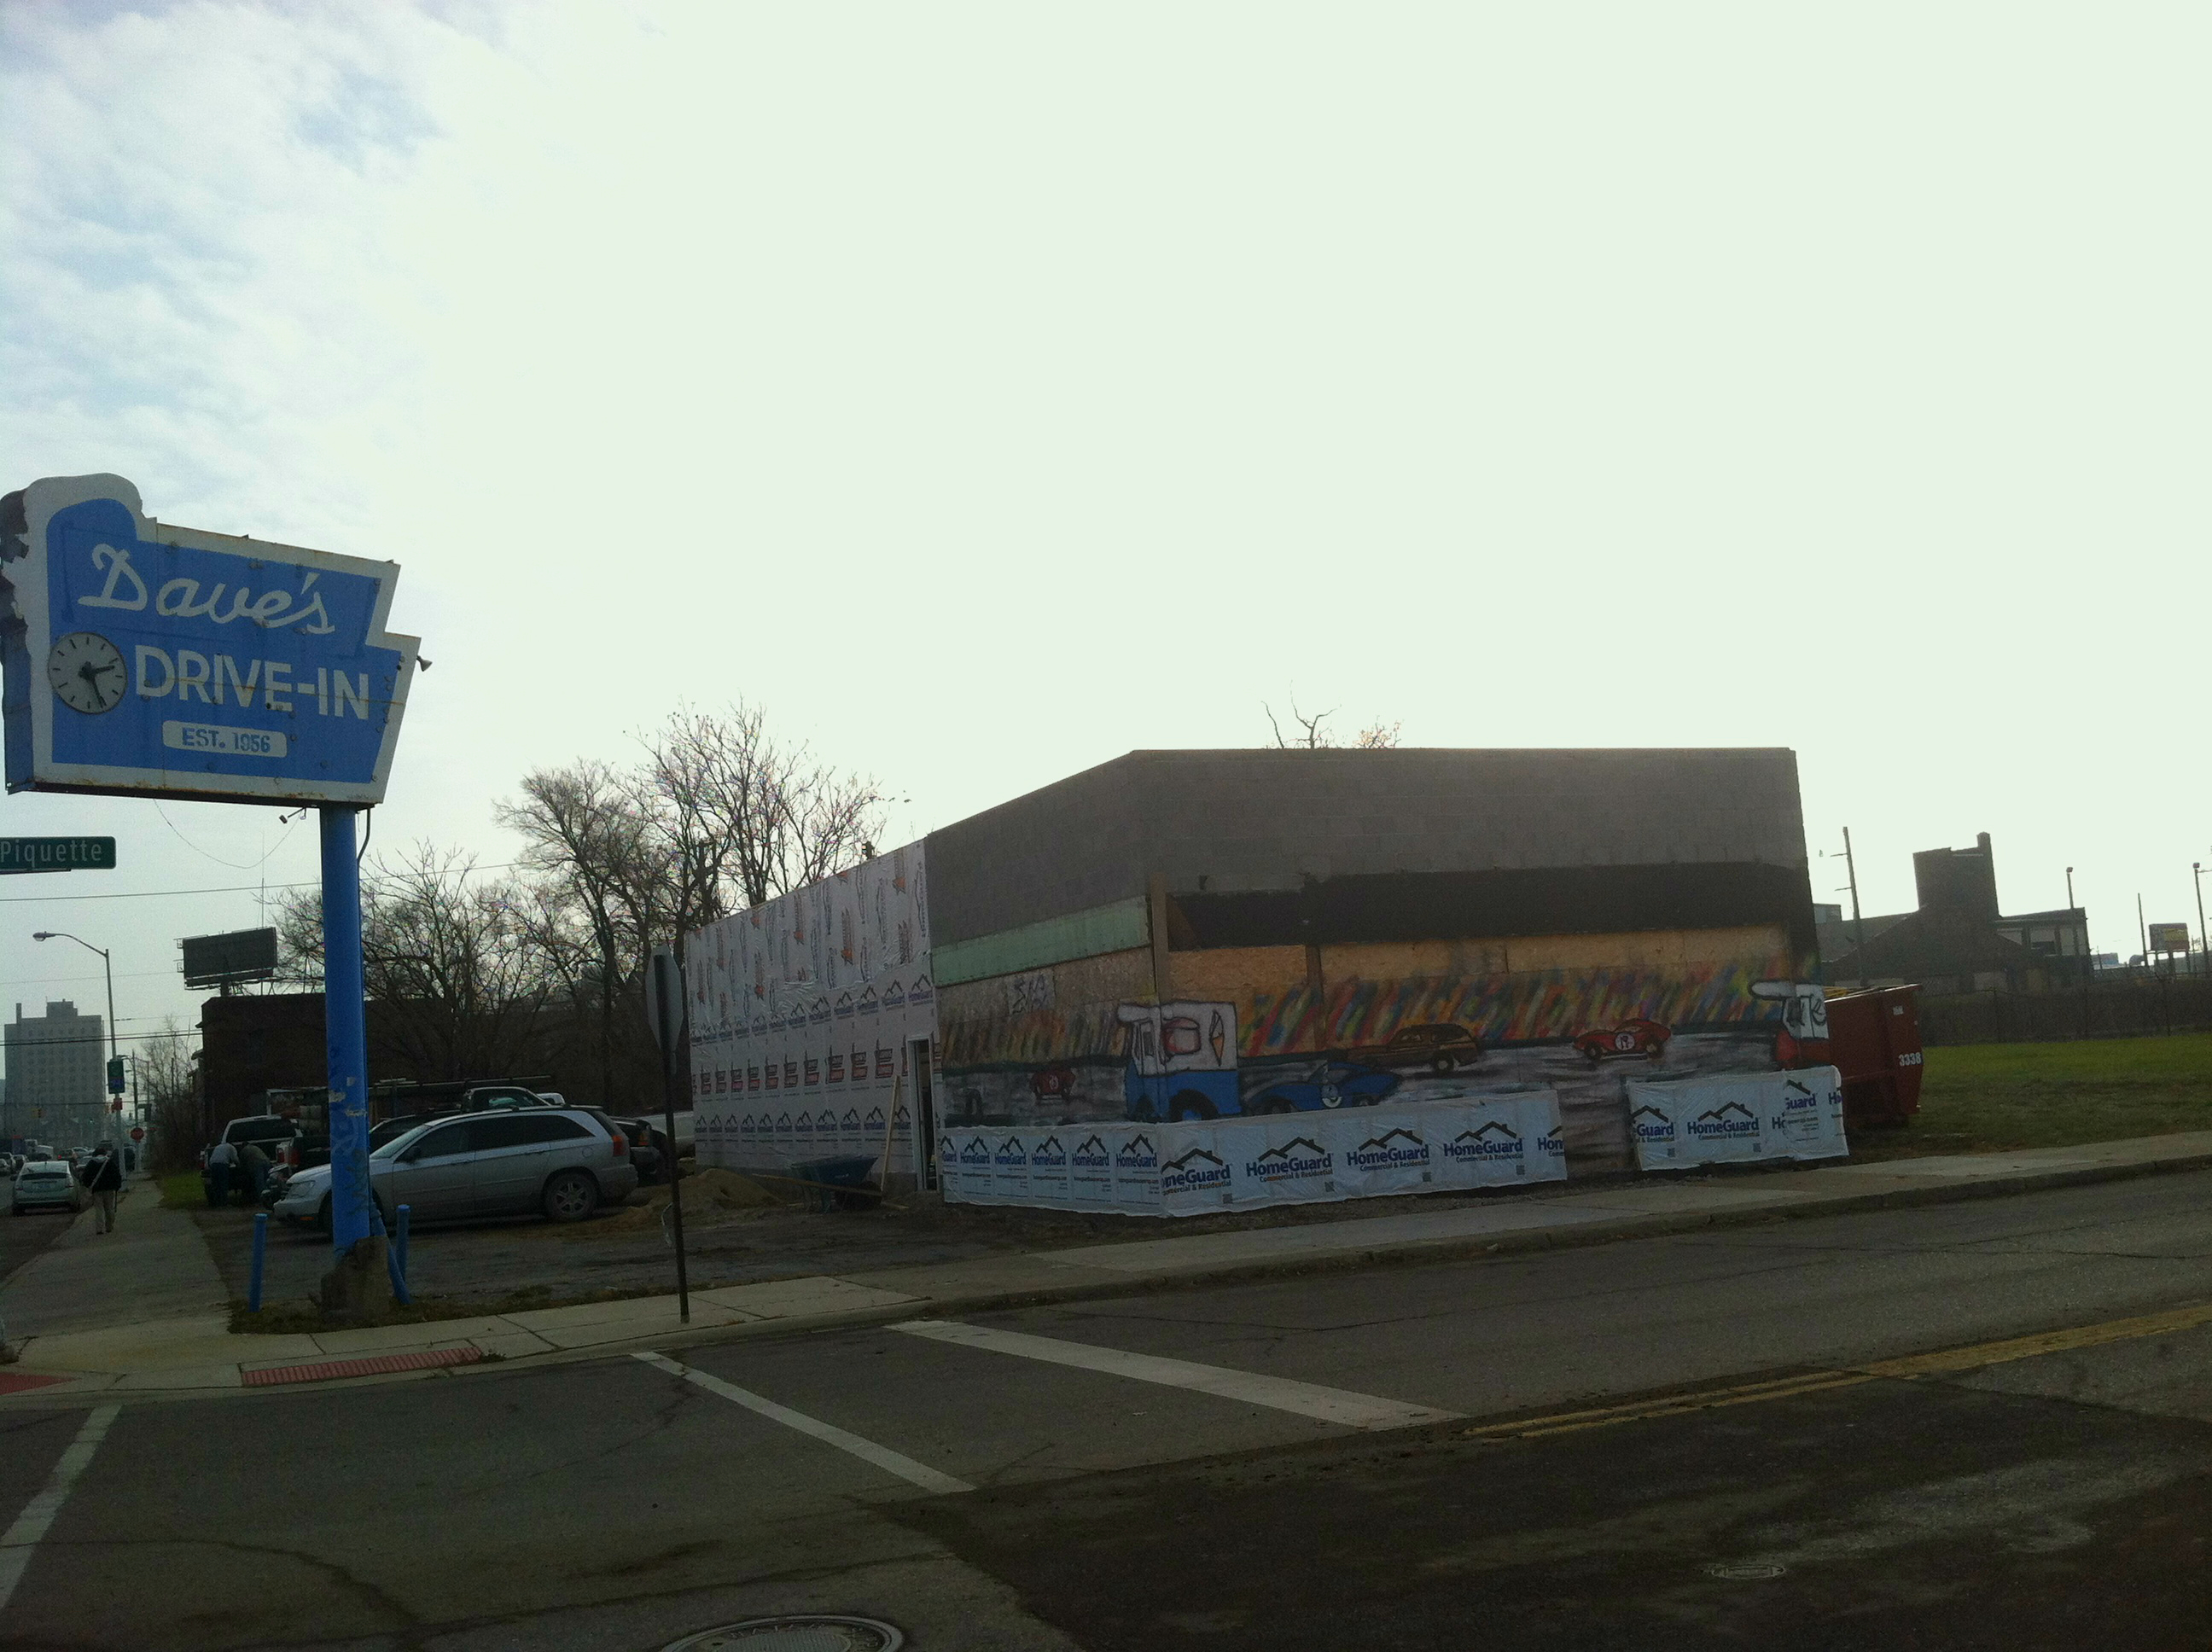 The former Dave's Drive-in is being renovated for a third Bucharest Grill location.